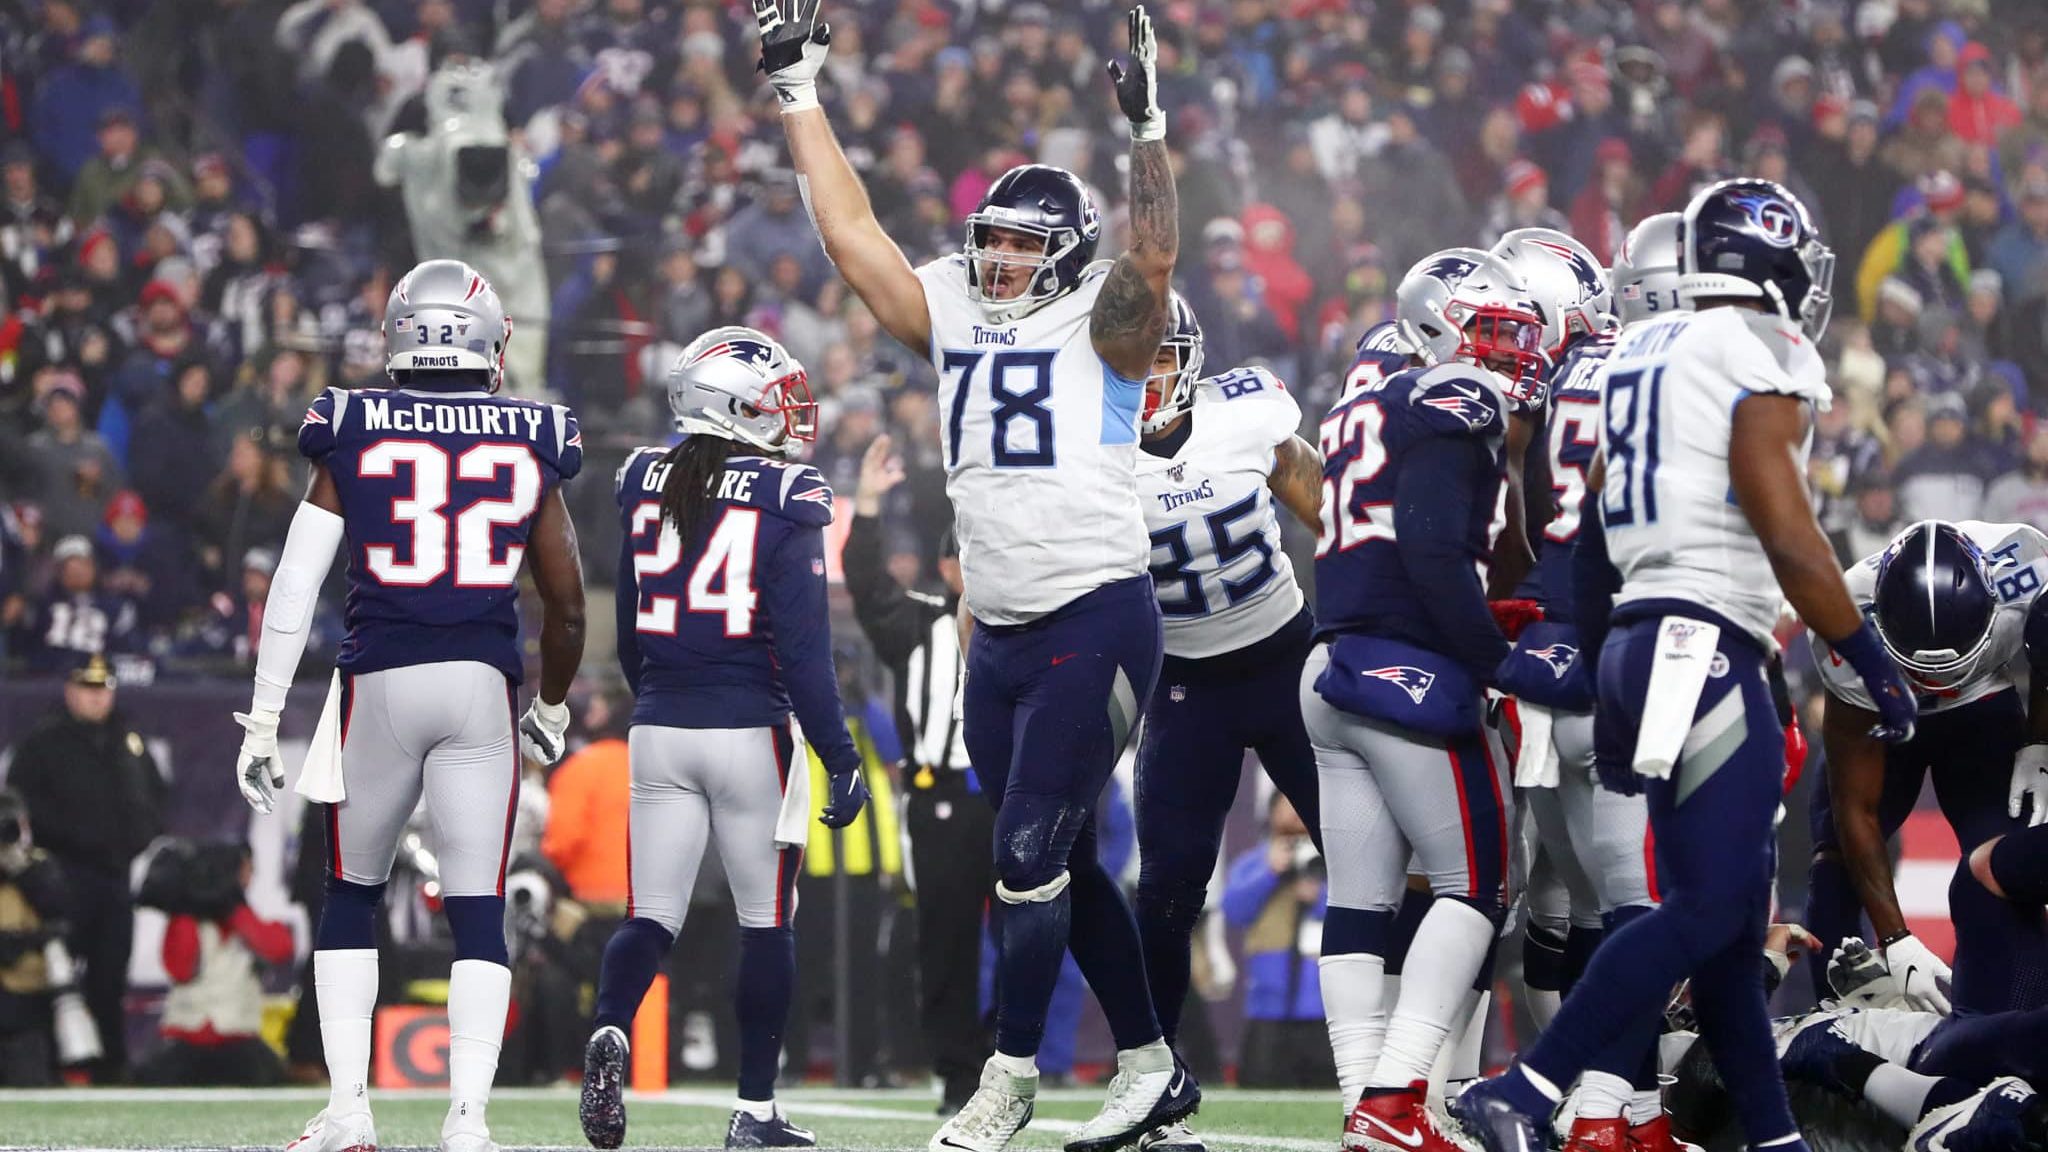 FOXBOROUGH, MASSACHUSETTS - JANUARY 04: Jack Conklin #78 of the Tennessee Titans reacts as they take on the New England Patriots in the first half o the AFC Wild Card Playoff game at Gillette Stadium on January 04, 2020 in Foxborough, Massachusetts. The Tennessee Titans won 20-13.